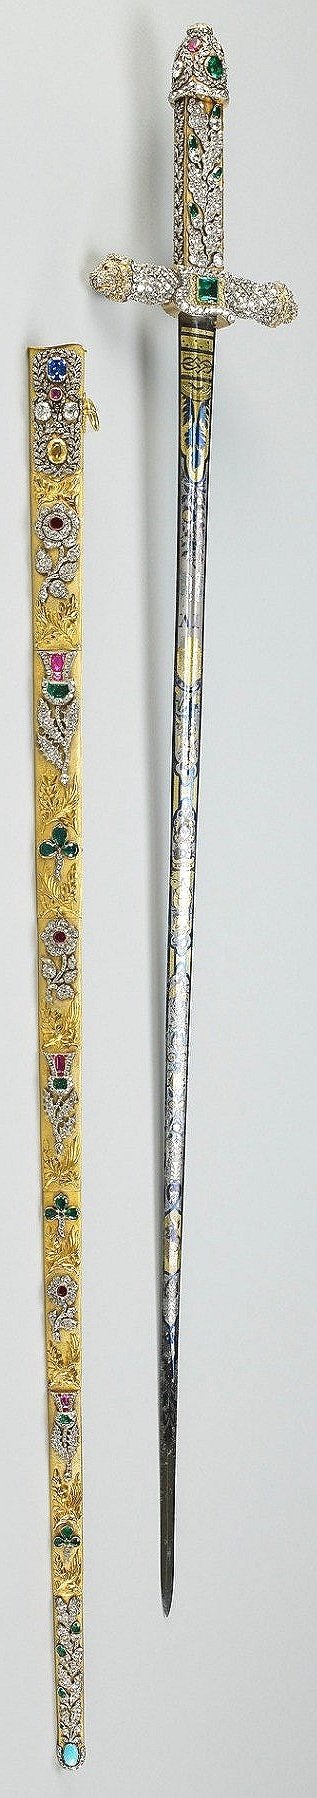 Sword of offering - gold covered leather scabbard set with gems